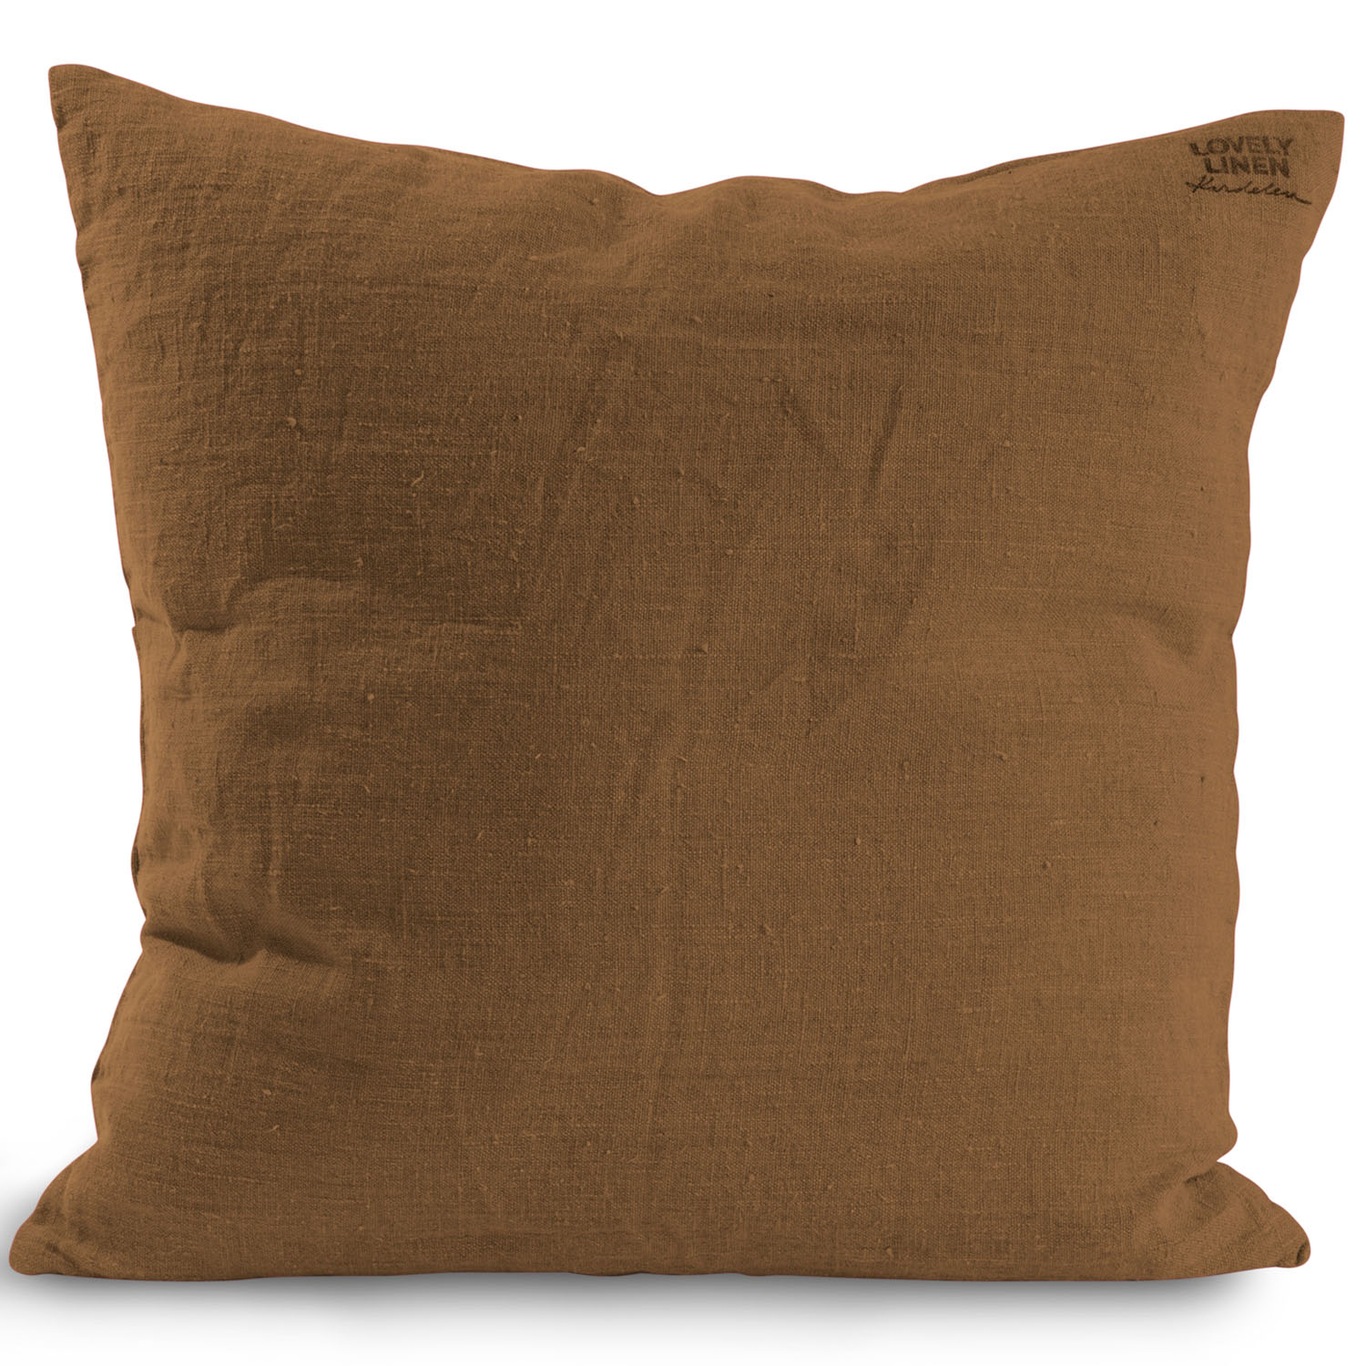 Lovely Cushion Cover 50x50 cm, Almond